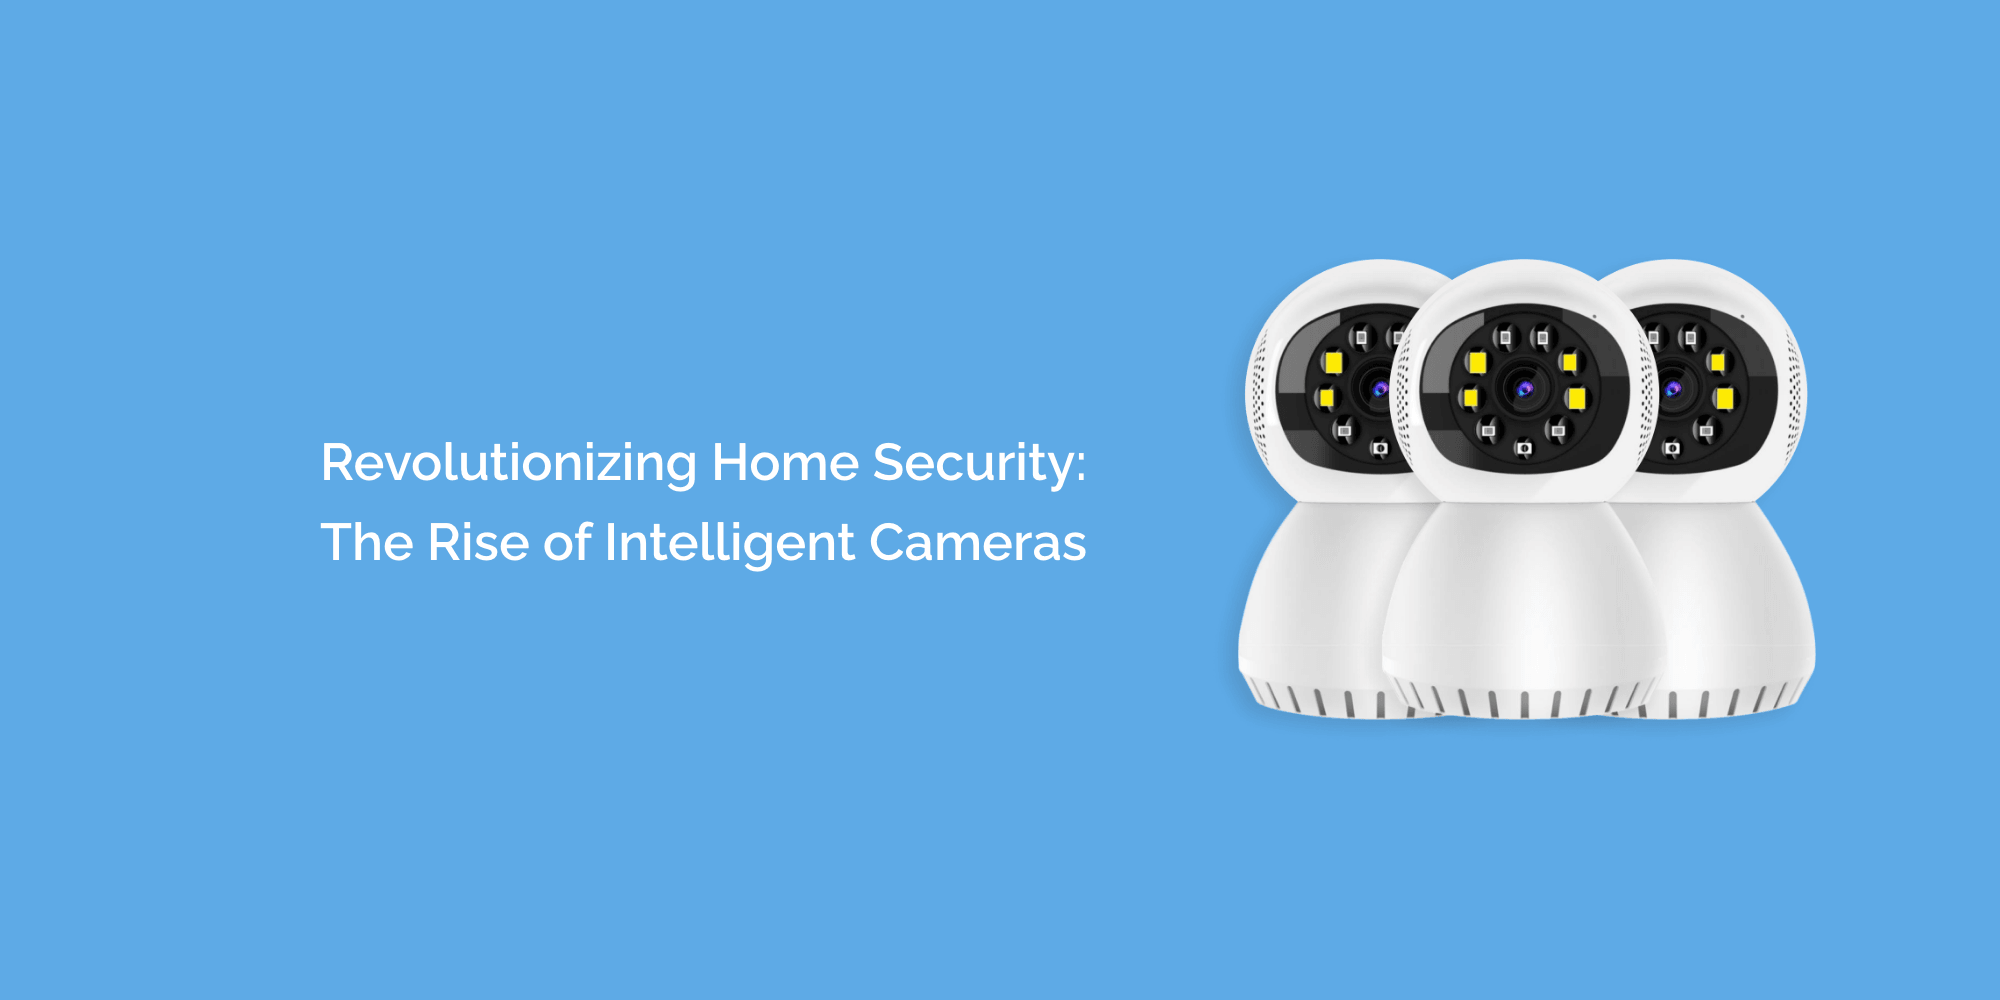 Revolutionizing Home Security: The Rise of Intelligent Cameras